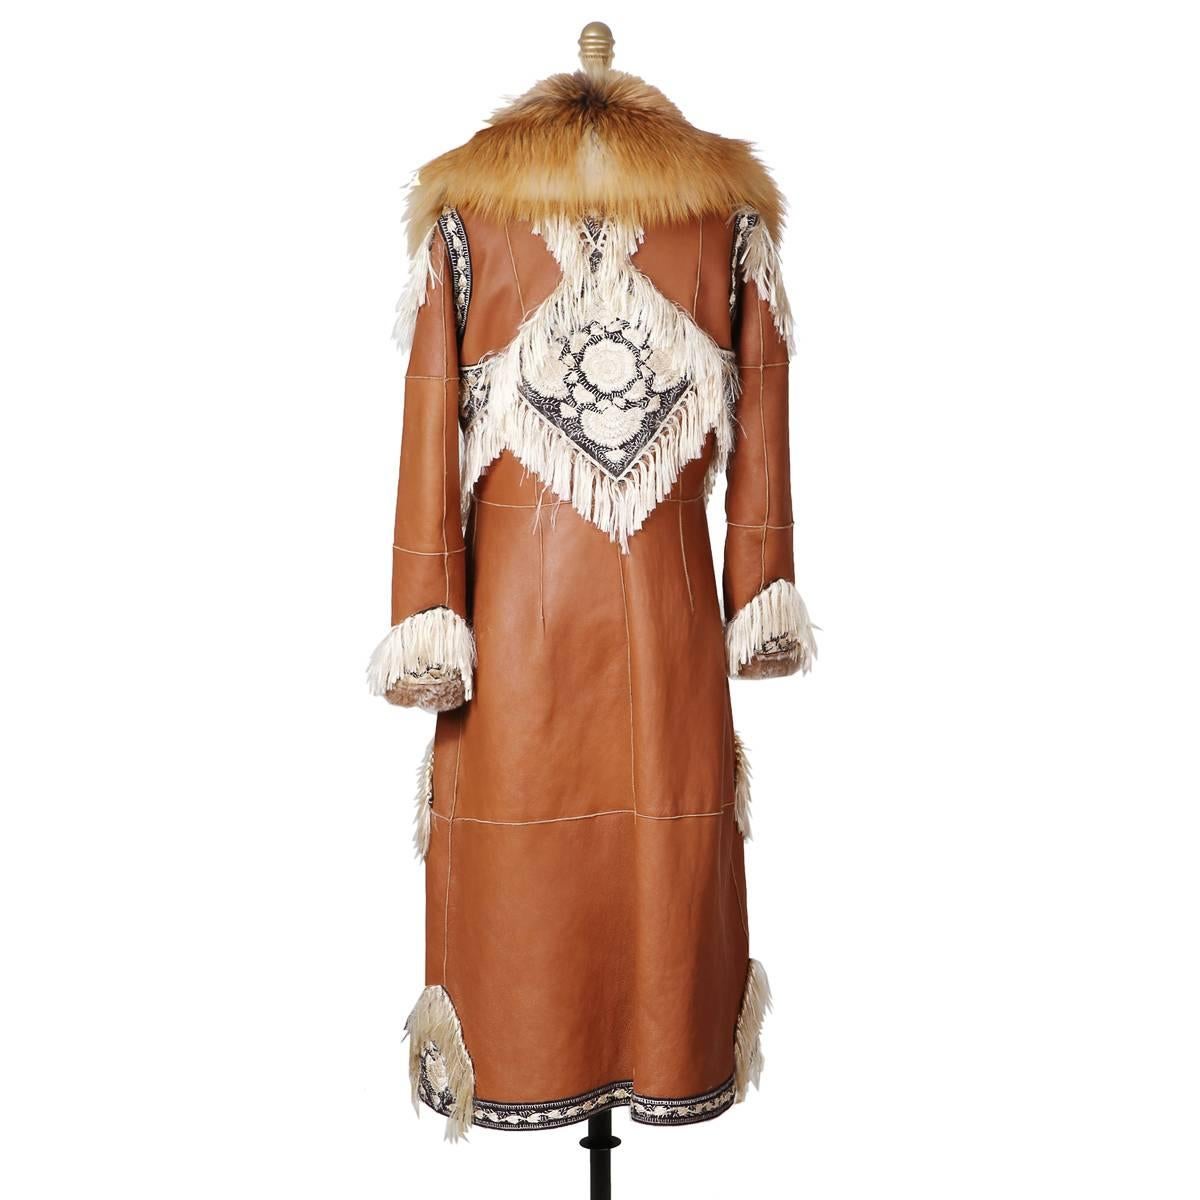 This is a coat from Alexander McQueen for the pre-fall 2016 collection.  Embroidery and fringe detail design with shearling lamb lining and a fox fur collar.  Hidden snap button closure in front.

Size 40
36